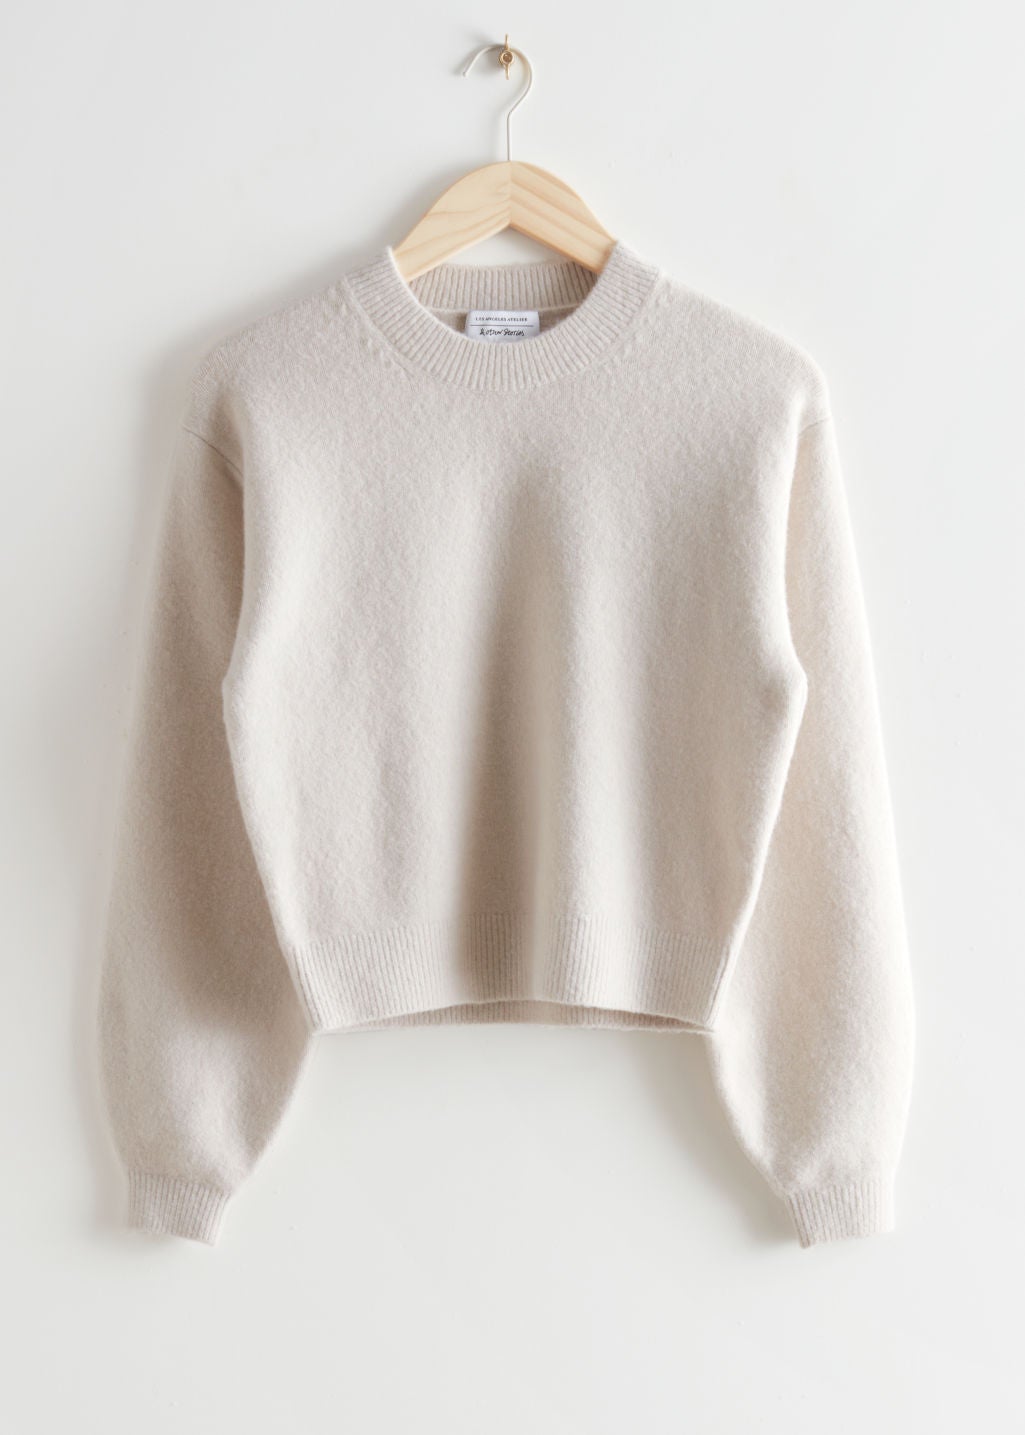 & Other Stories + Cropped Relaxed Sweater